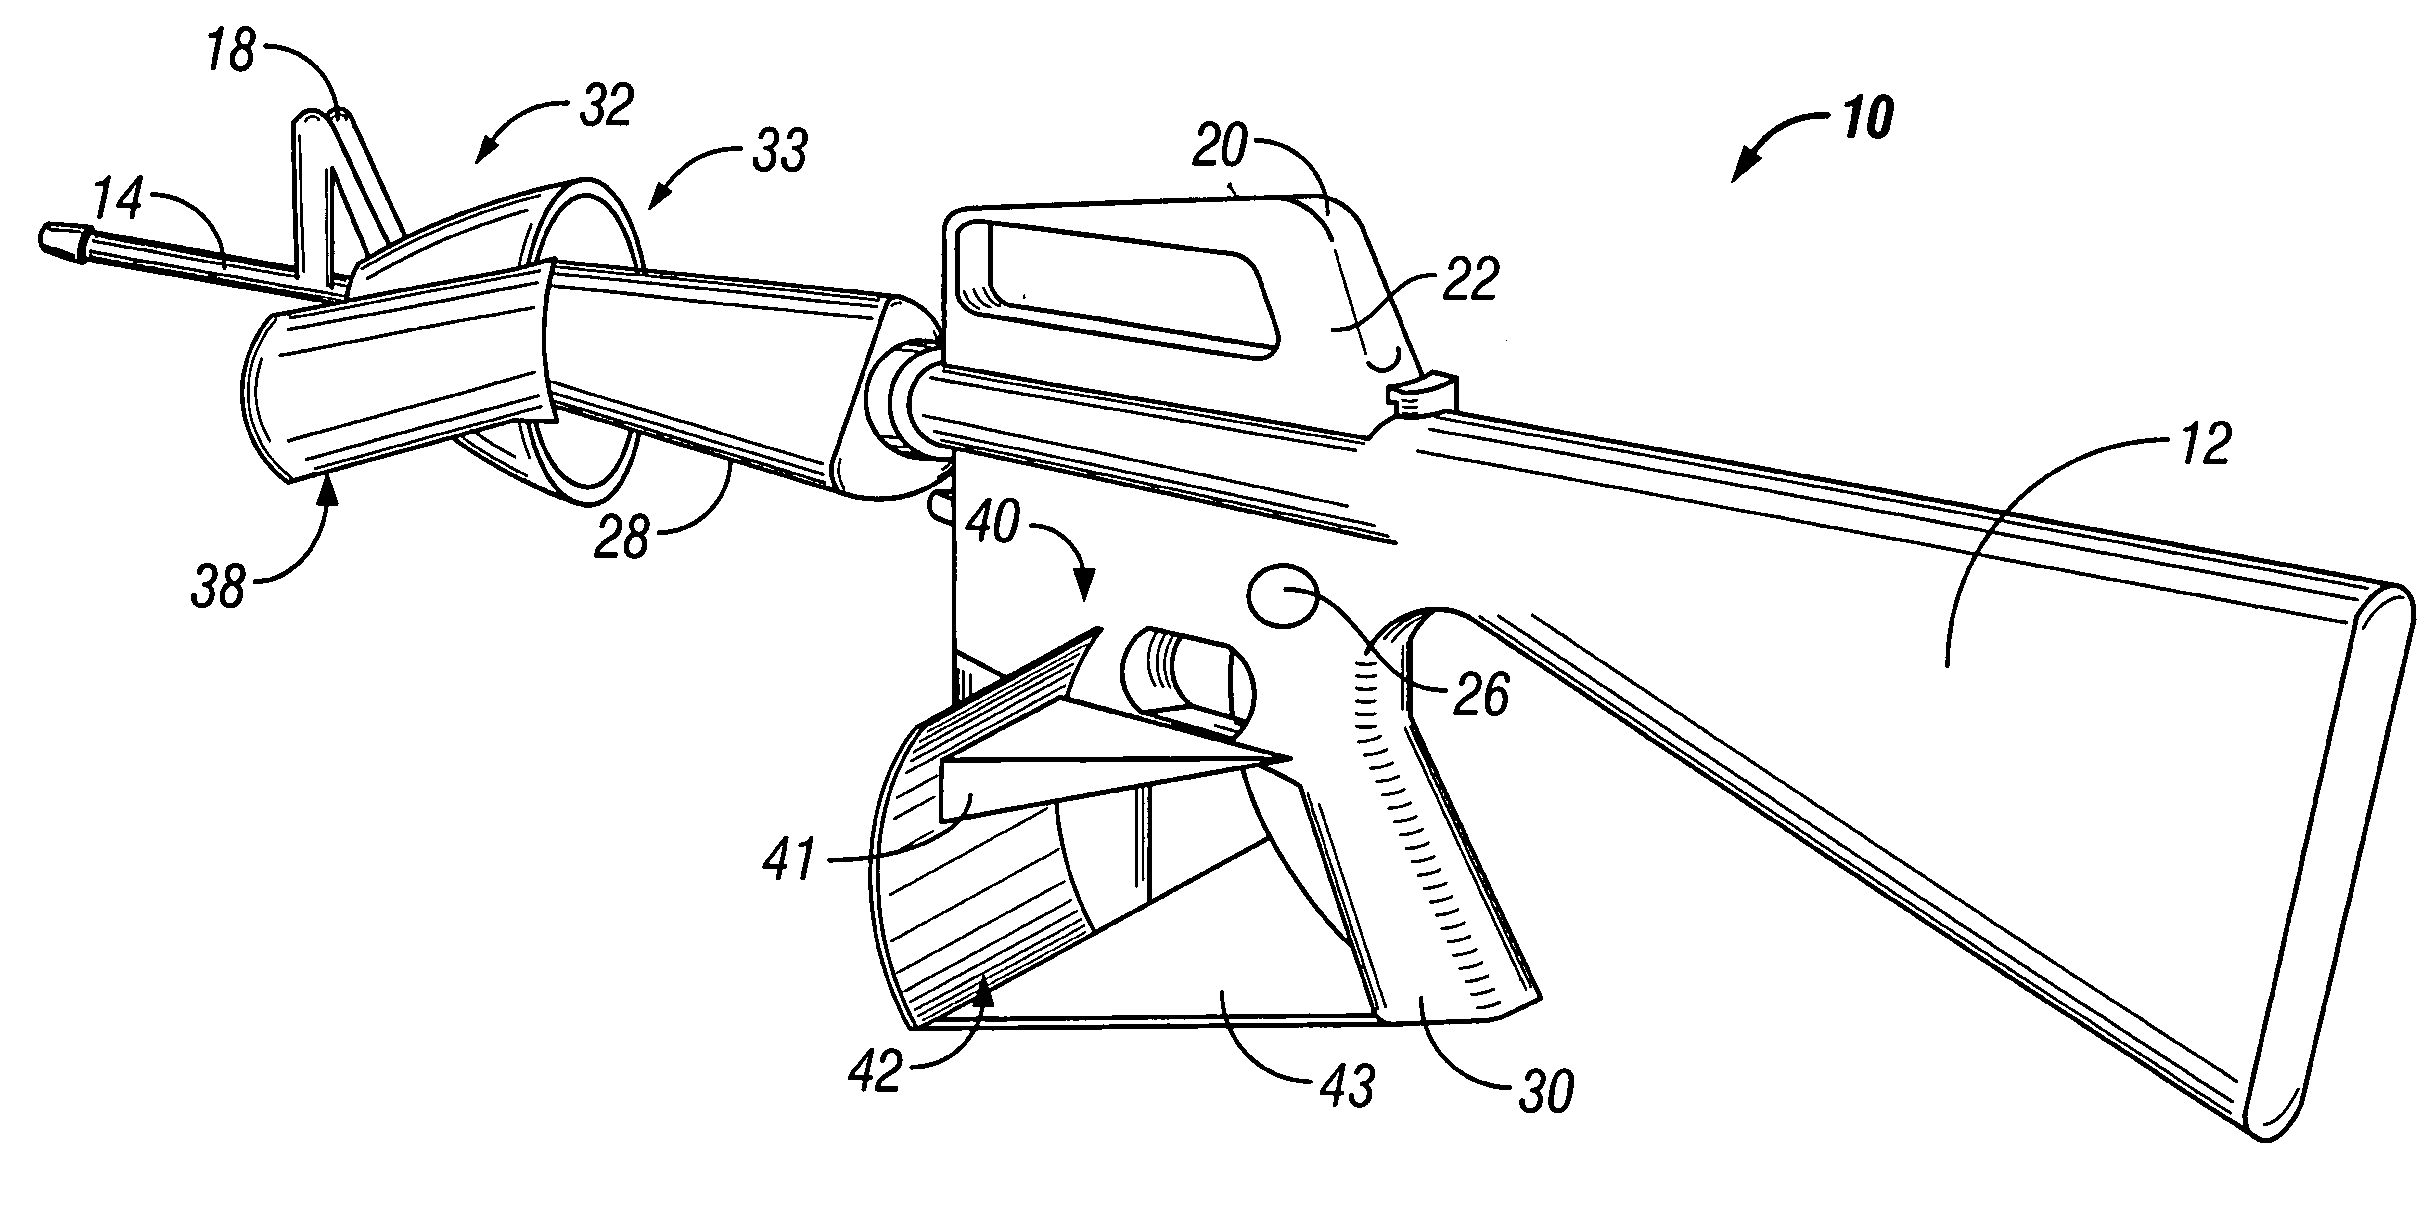 Assault rifle hand and forearm guard and method of use